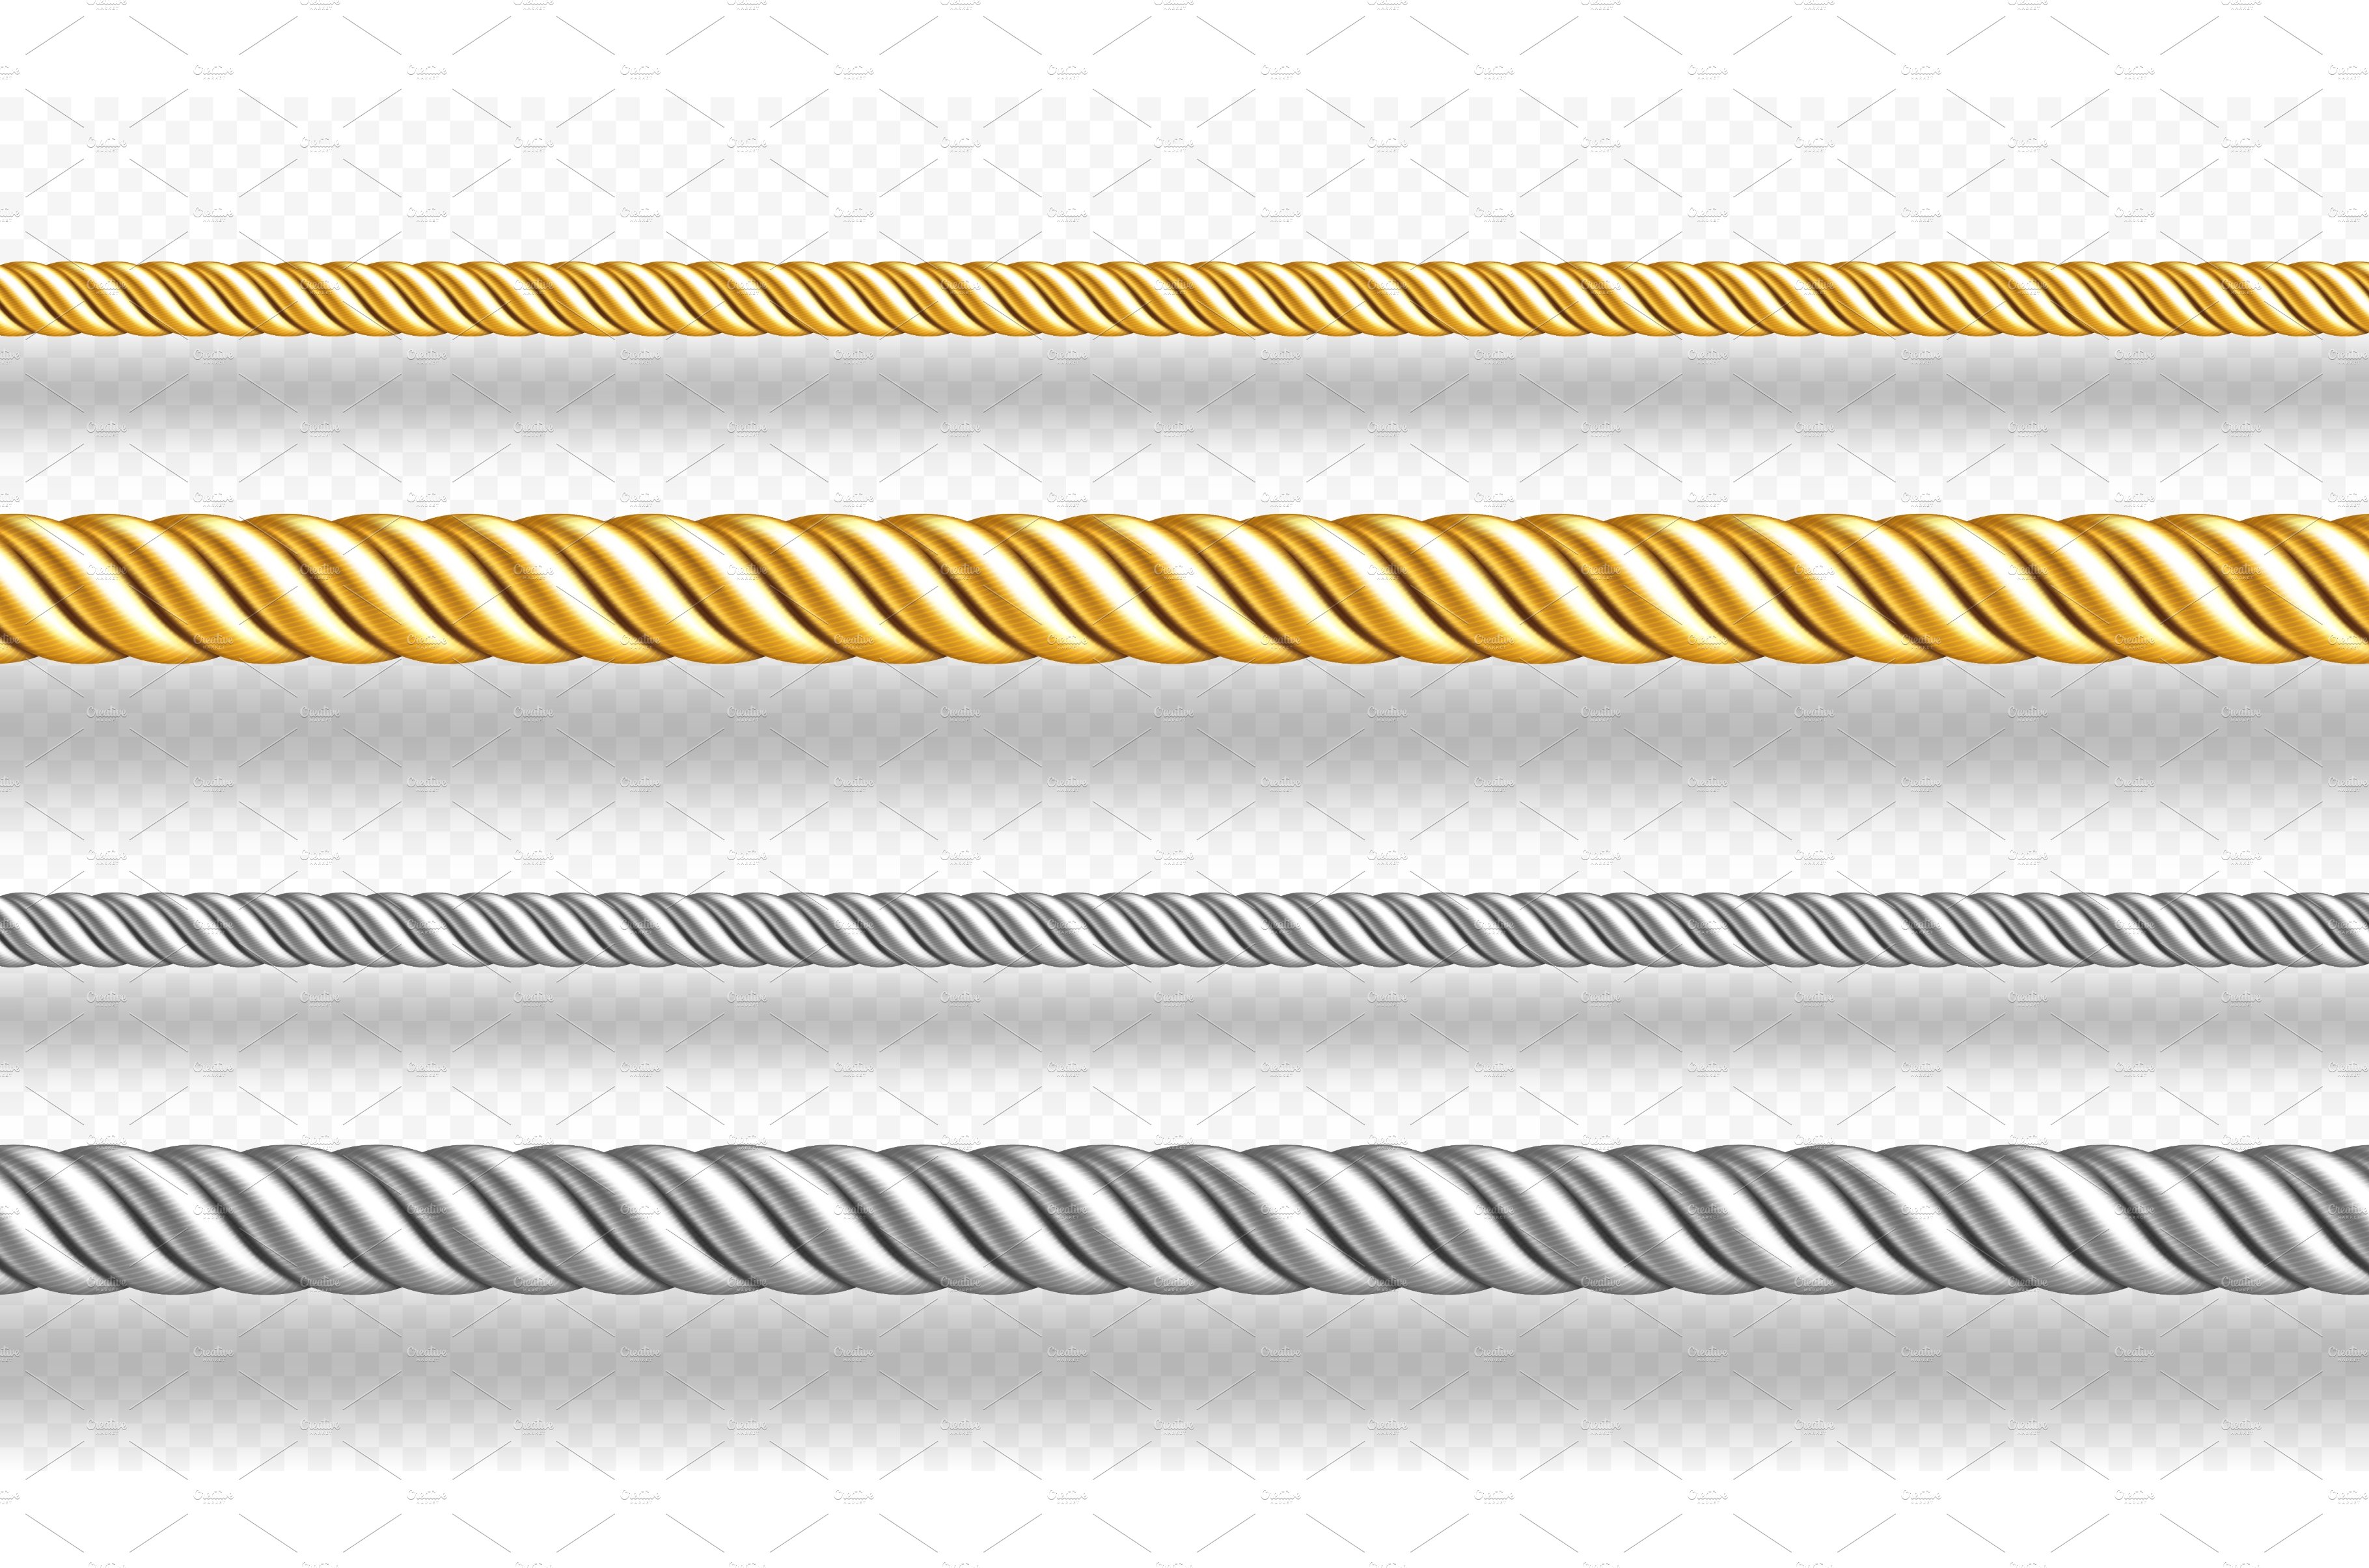 Gold and silver ropes, twisted cover image.